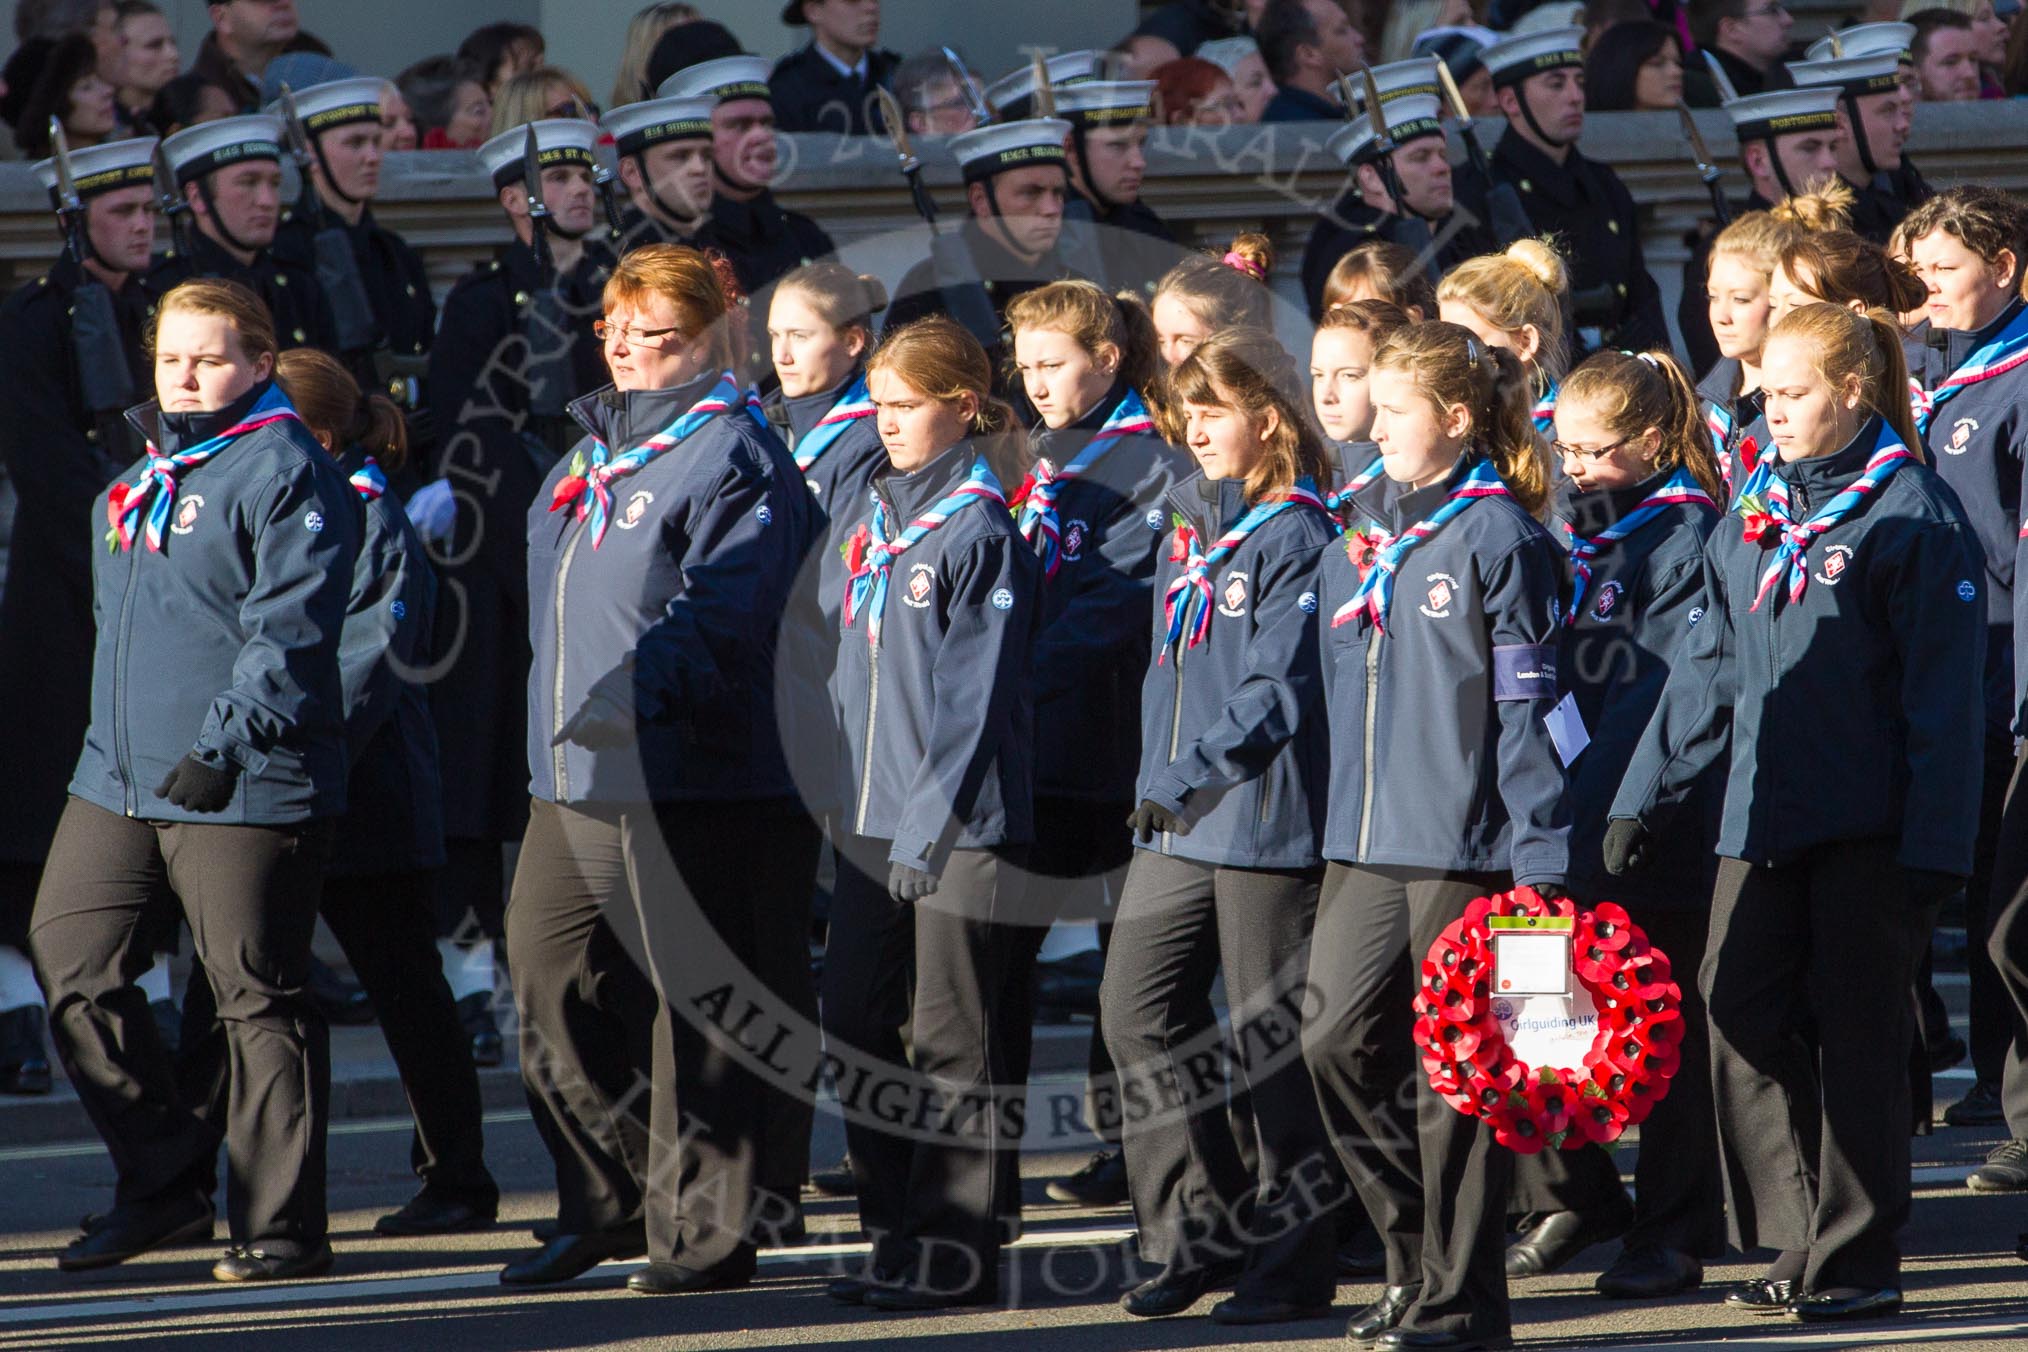 Remembrance Sunday 2012 Cenotaph March Past: Group M48 - Girlguiding London & South East England..
Whitehall, Cenotaph,
London SW1,

United Kingdom,
on 11 November 2012 at 12:15, image #1713